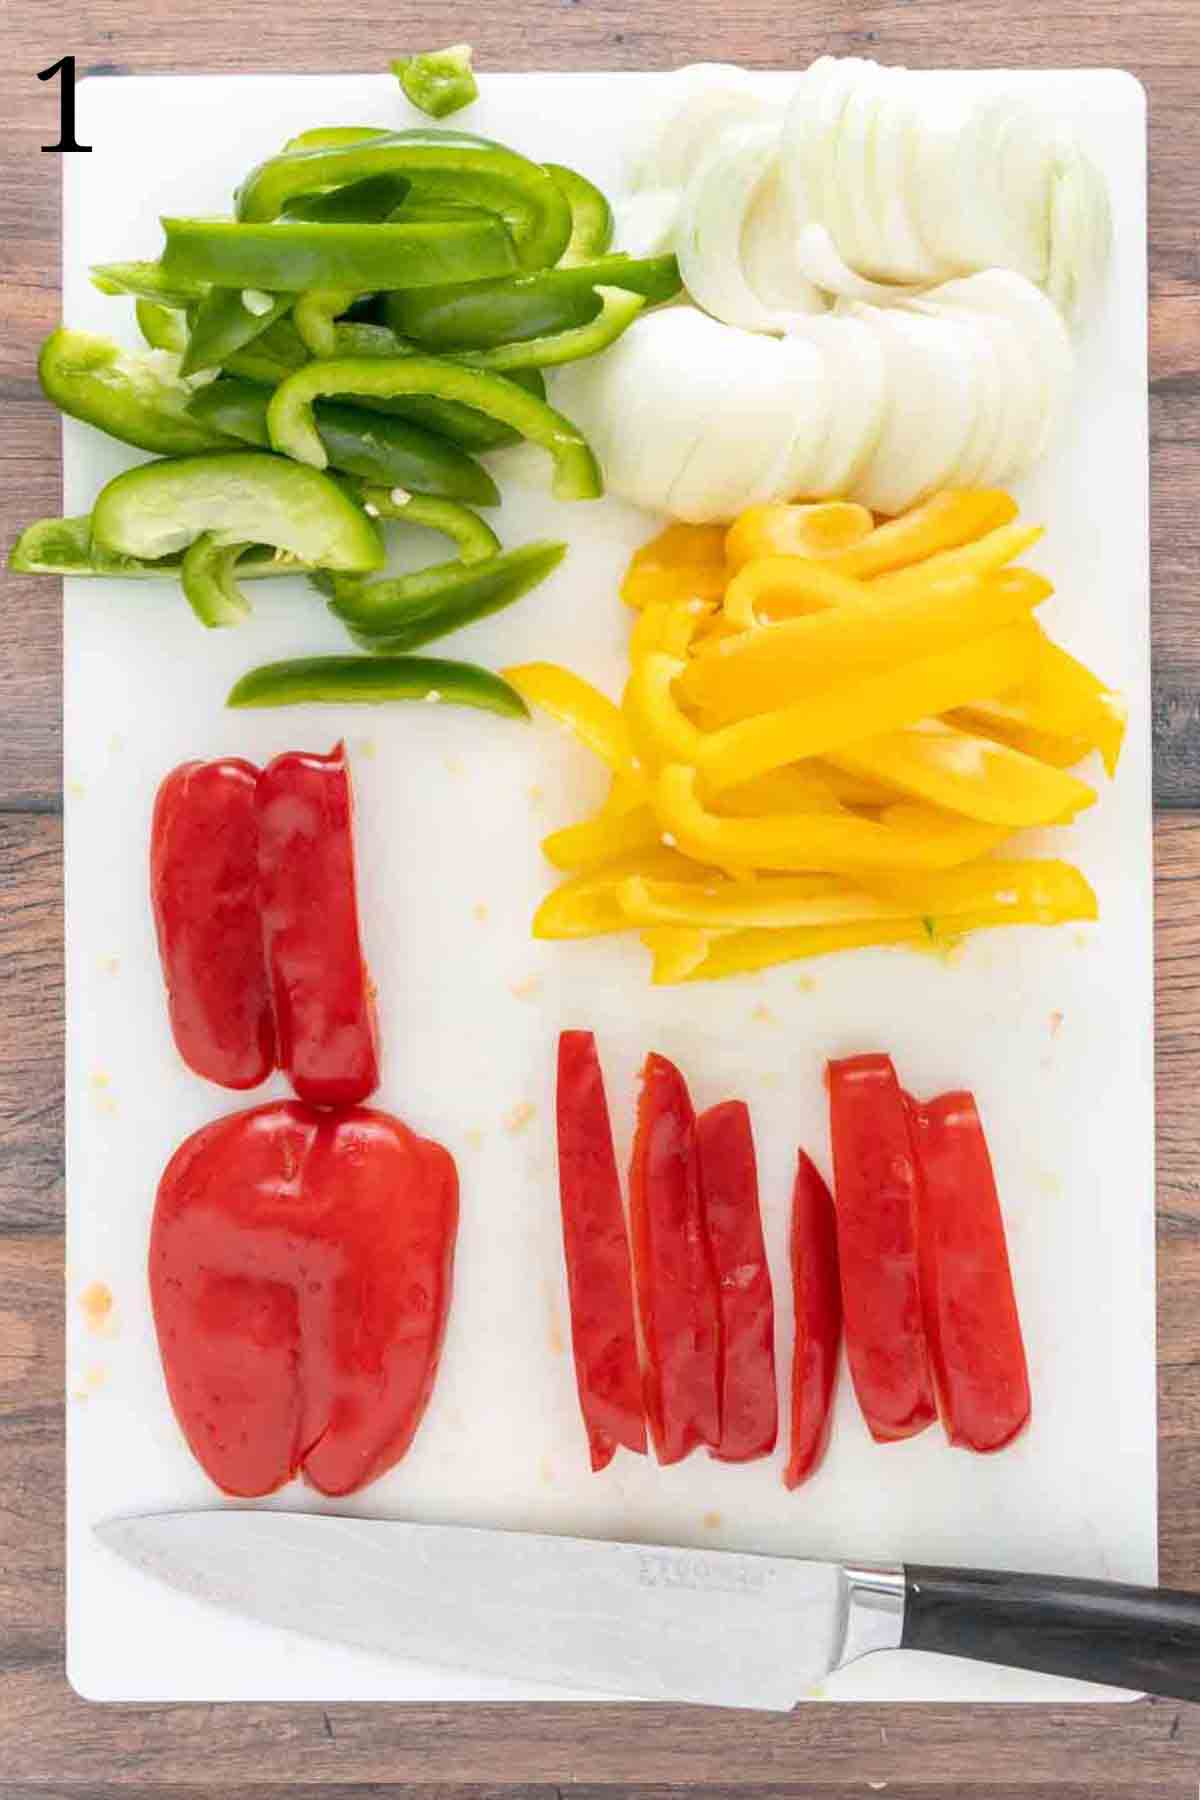 How to prep the vegetables.